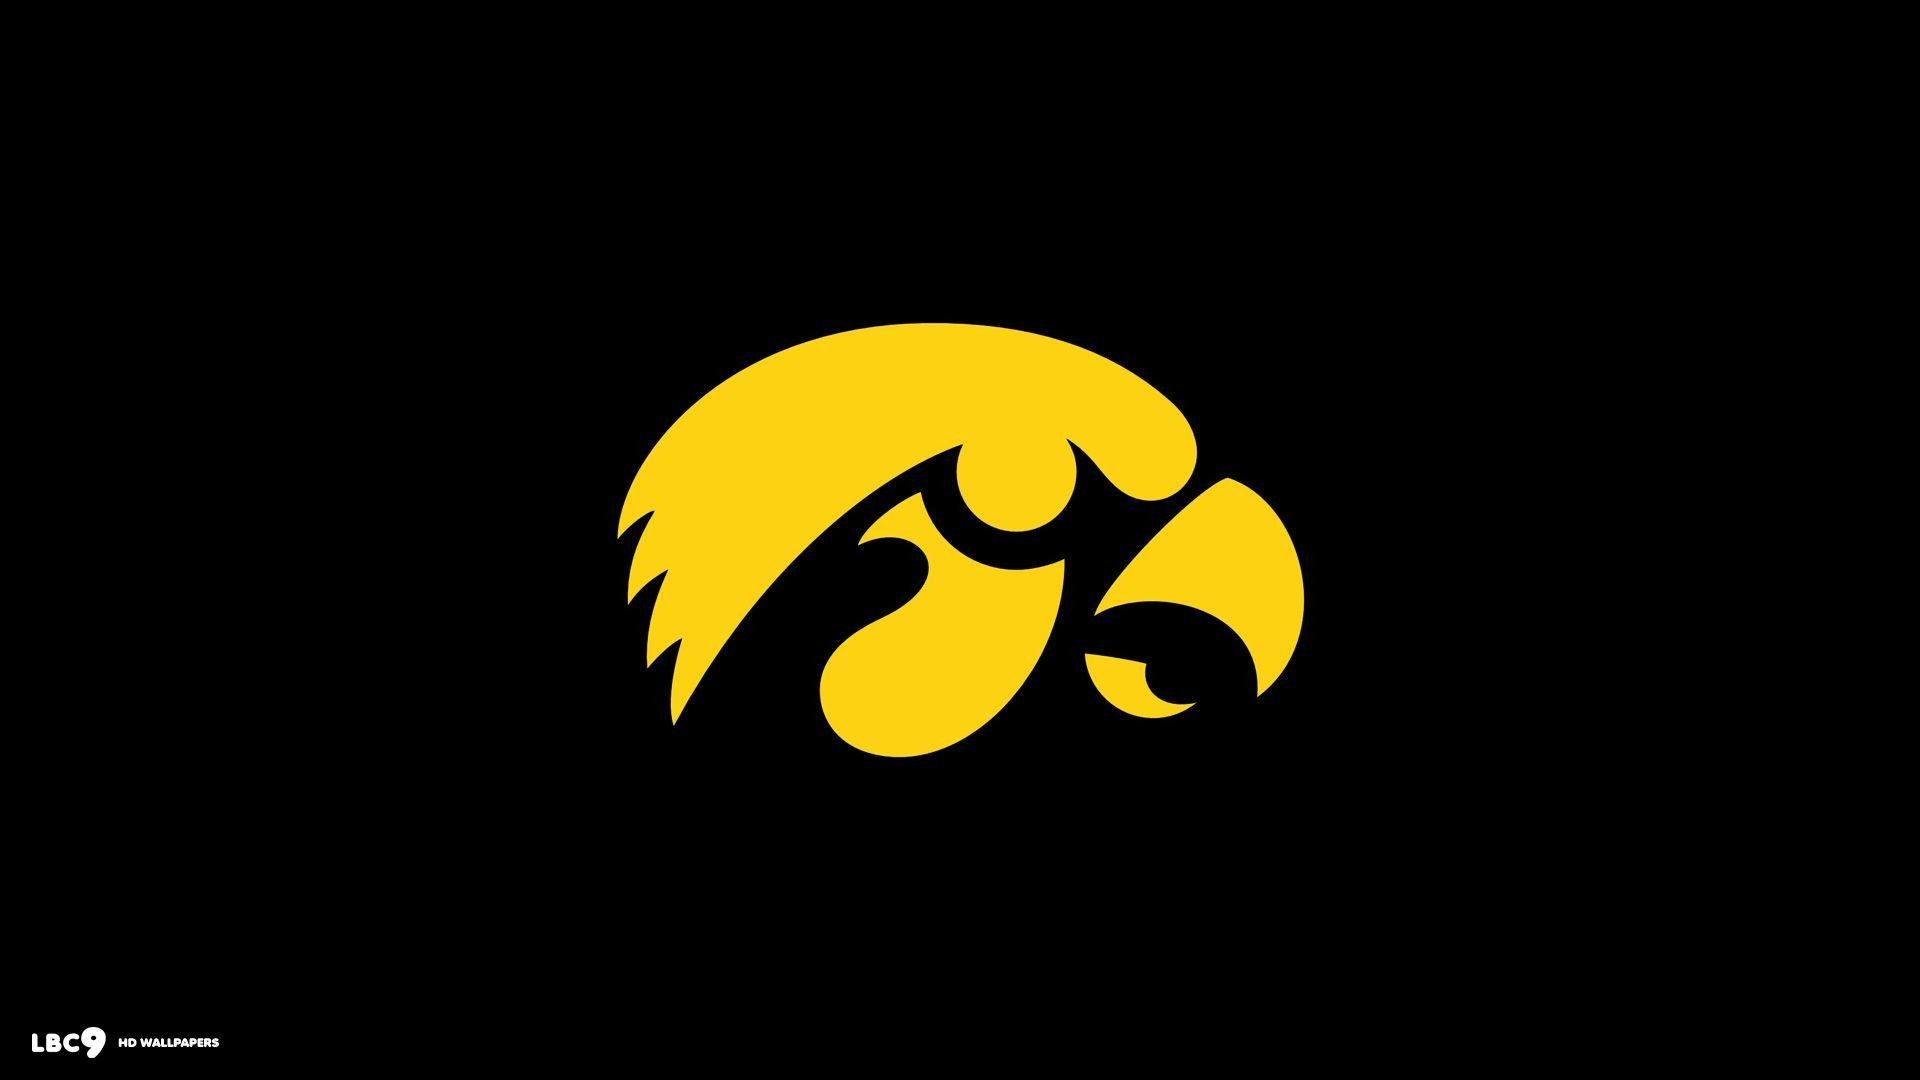 Iowa Hawkeyes Wallpaper Pictures